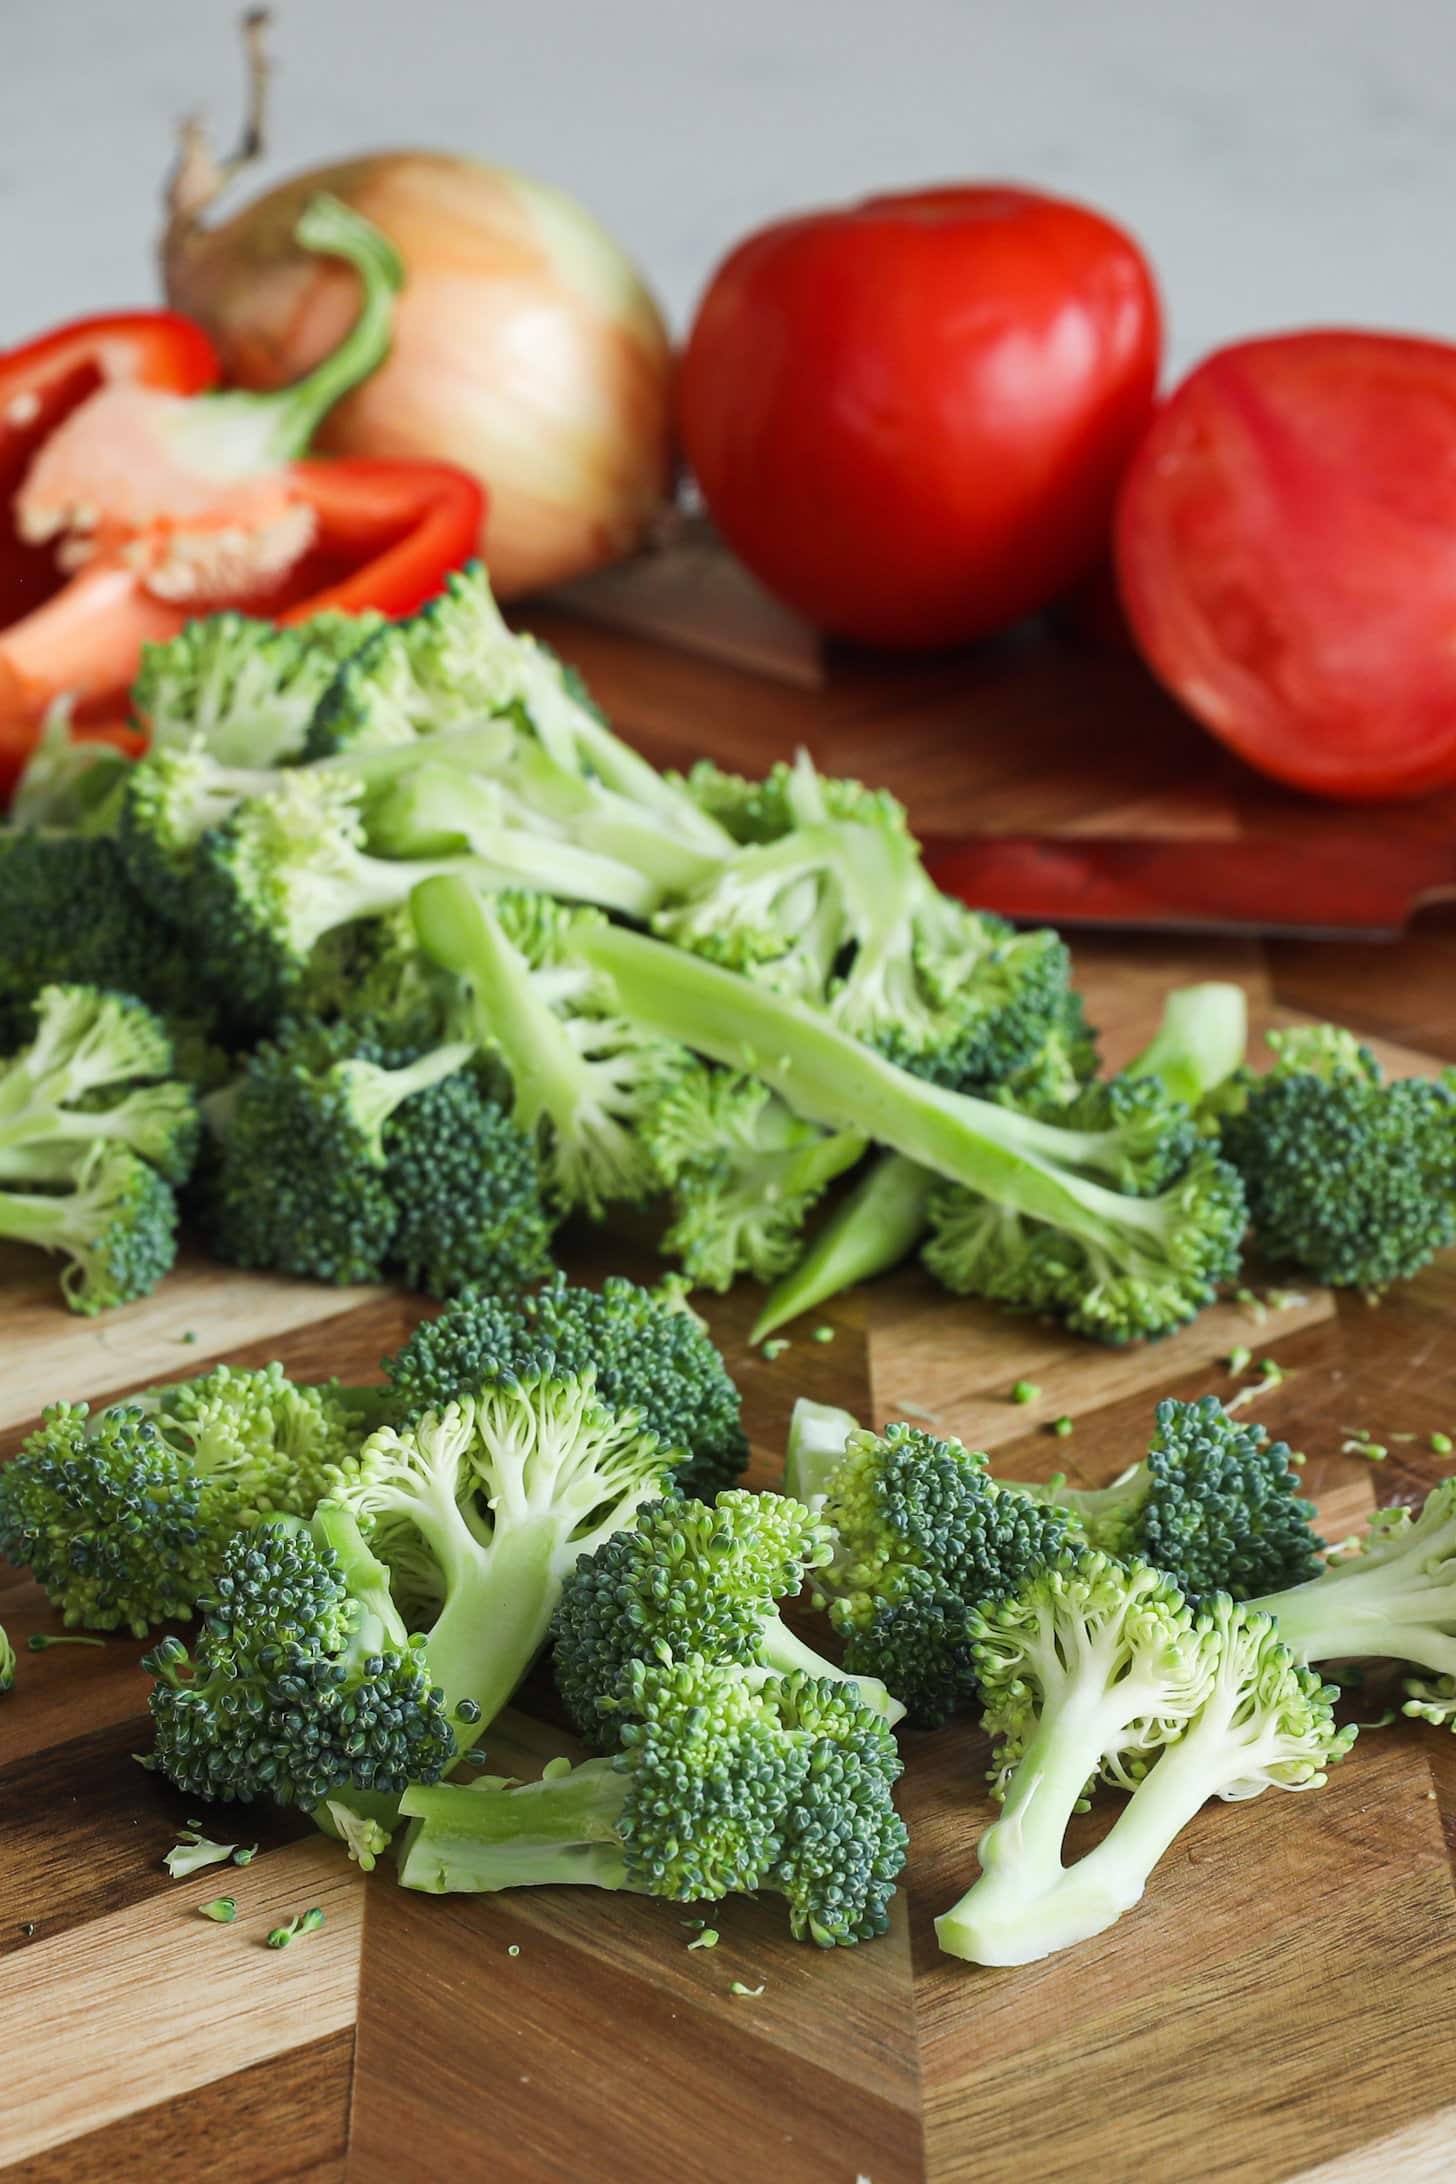 Chopped florets of broccoli on a wooden board with other vegetables in the background.